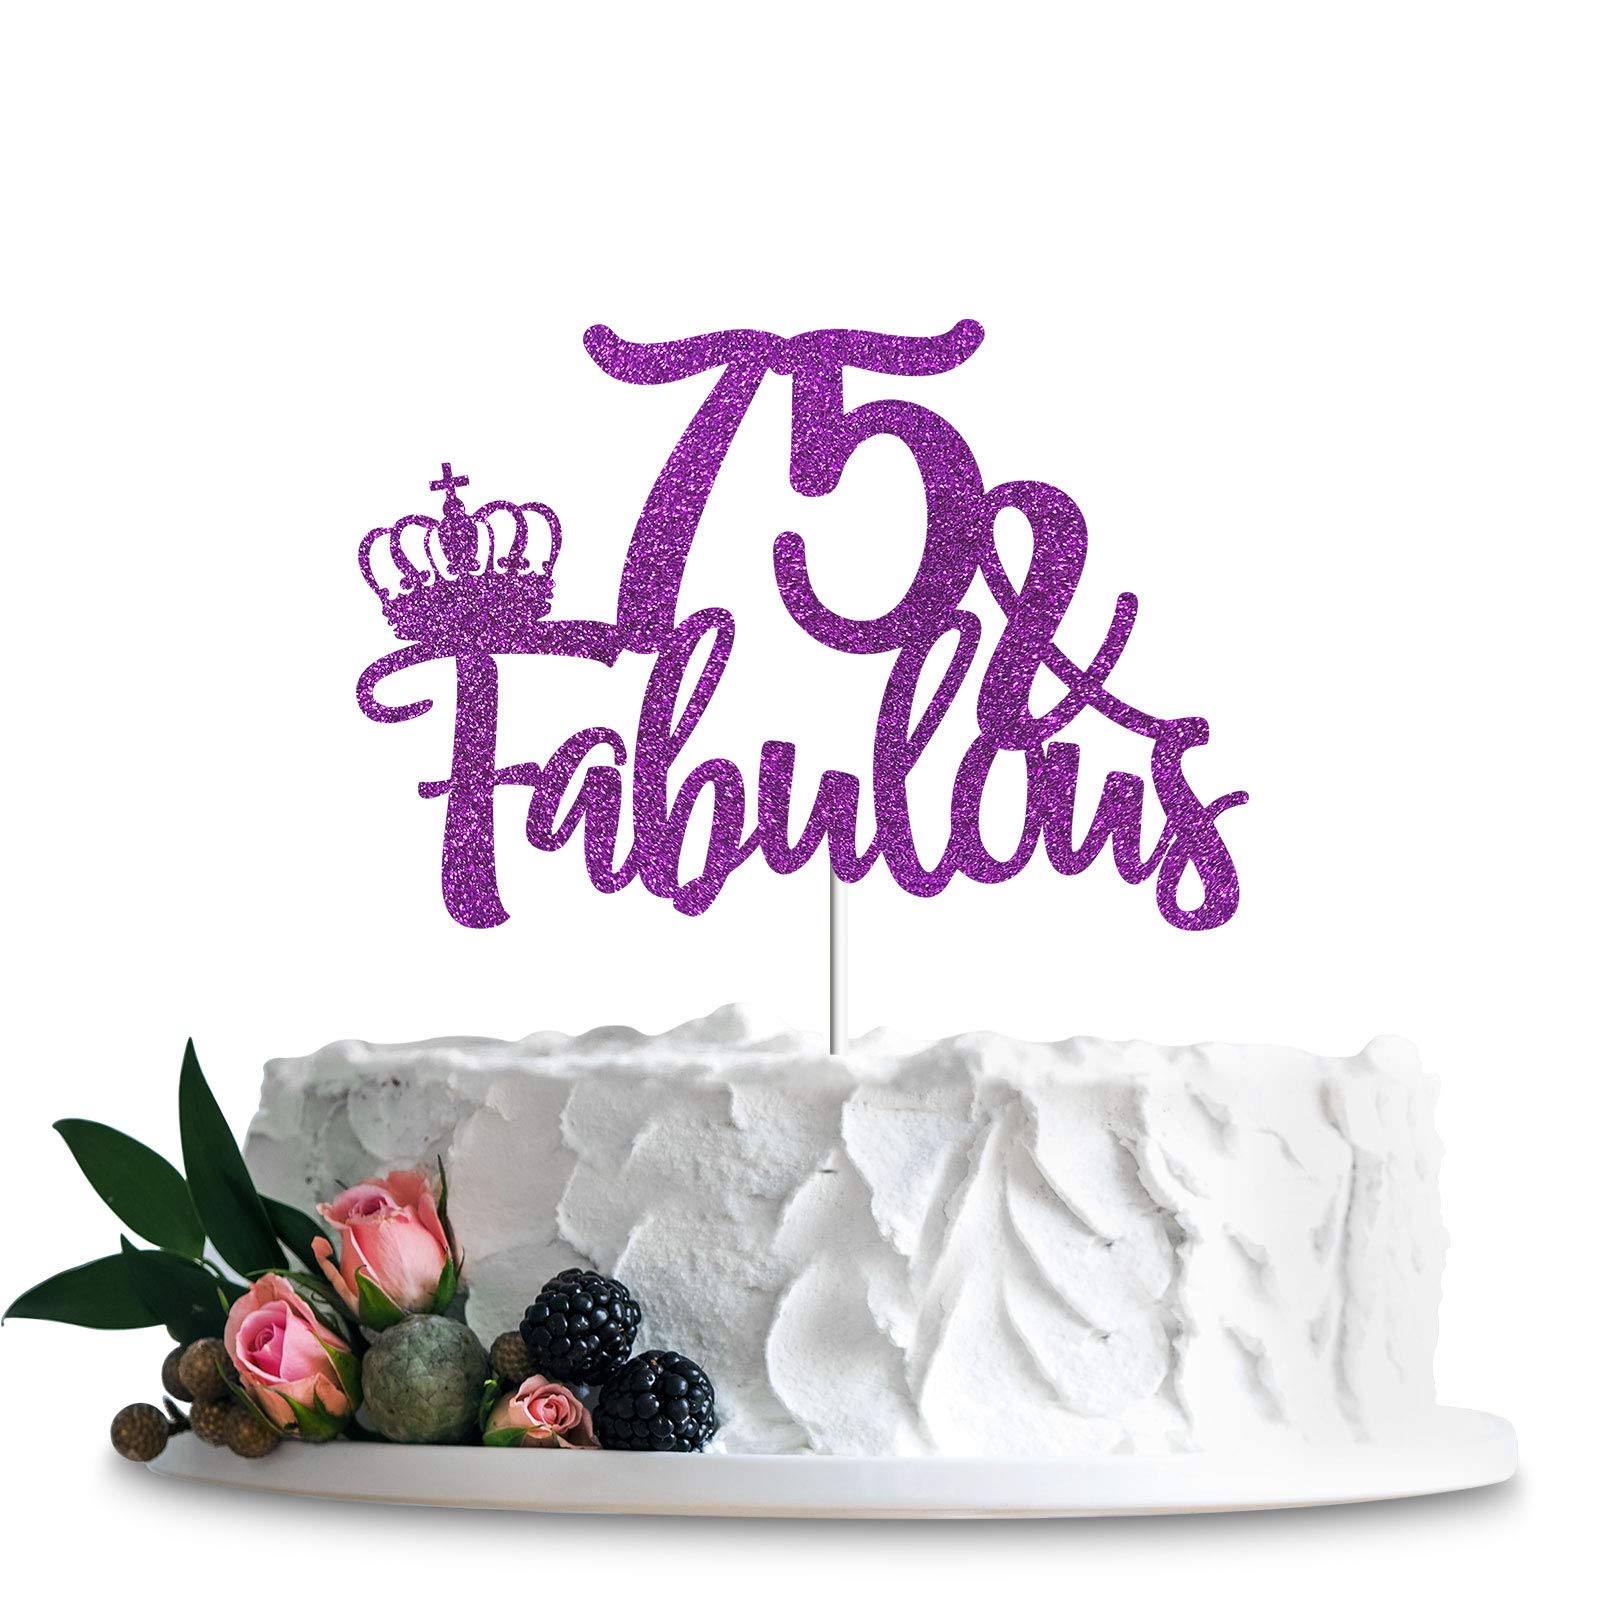 75 Years Loved Cake Topper - 75th Birthday Cake Topper